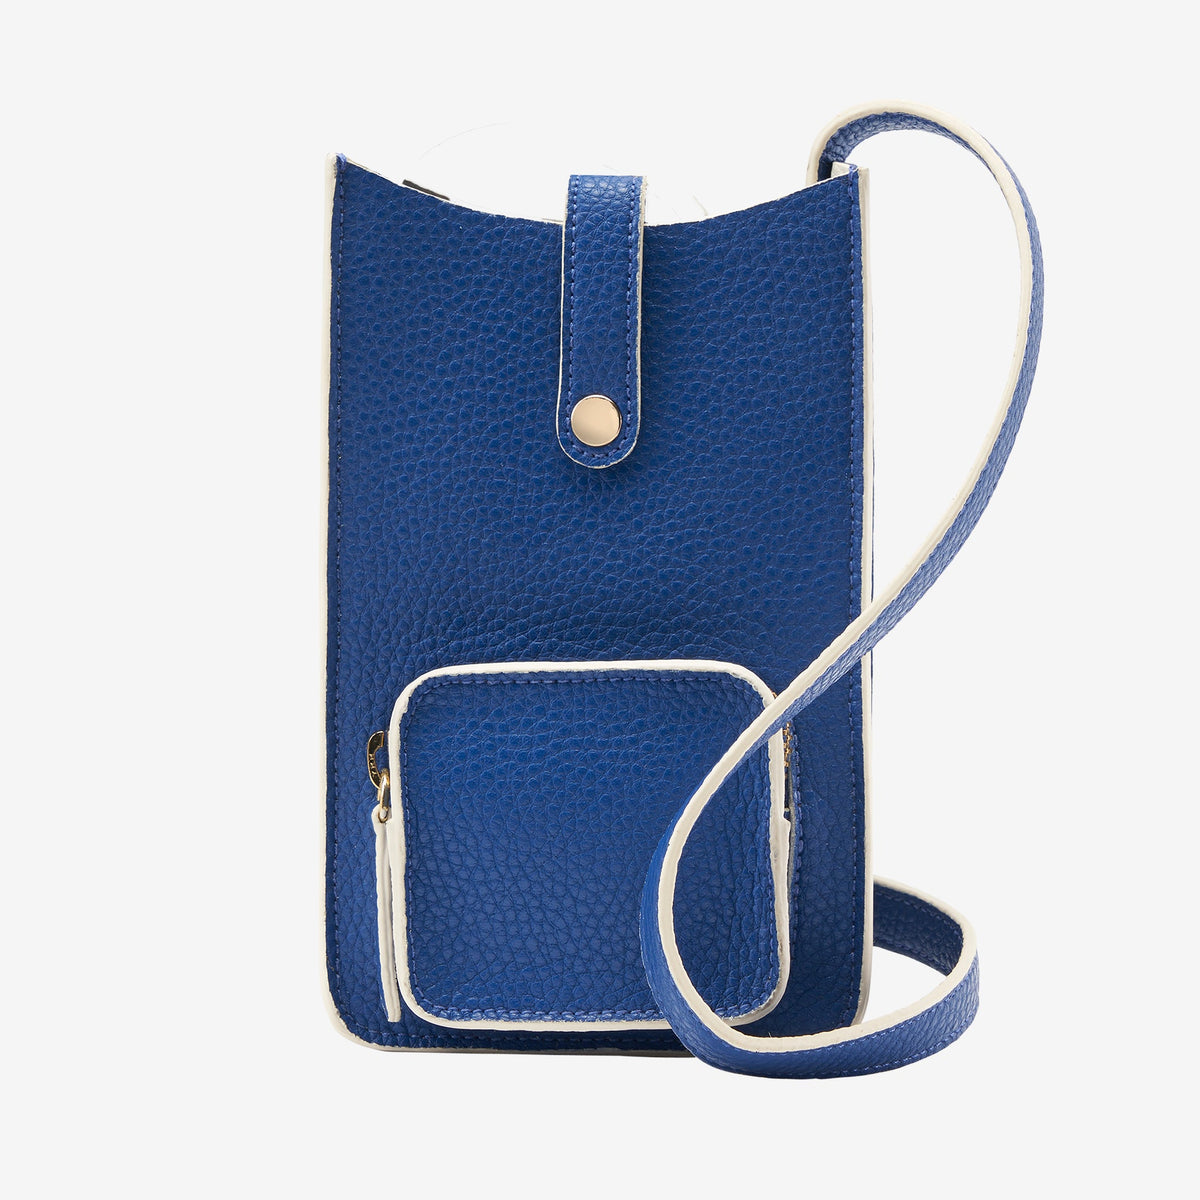    tusk-9929-womens-recycled-leather-cellphone-crossbody-bag-navy-front